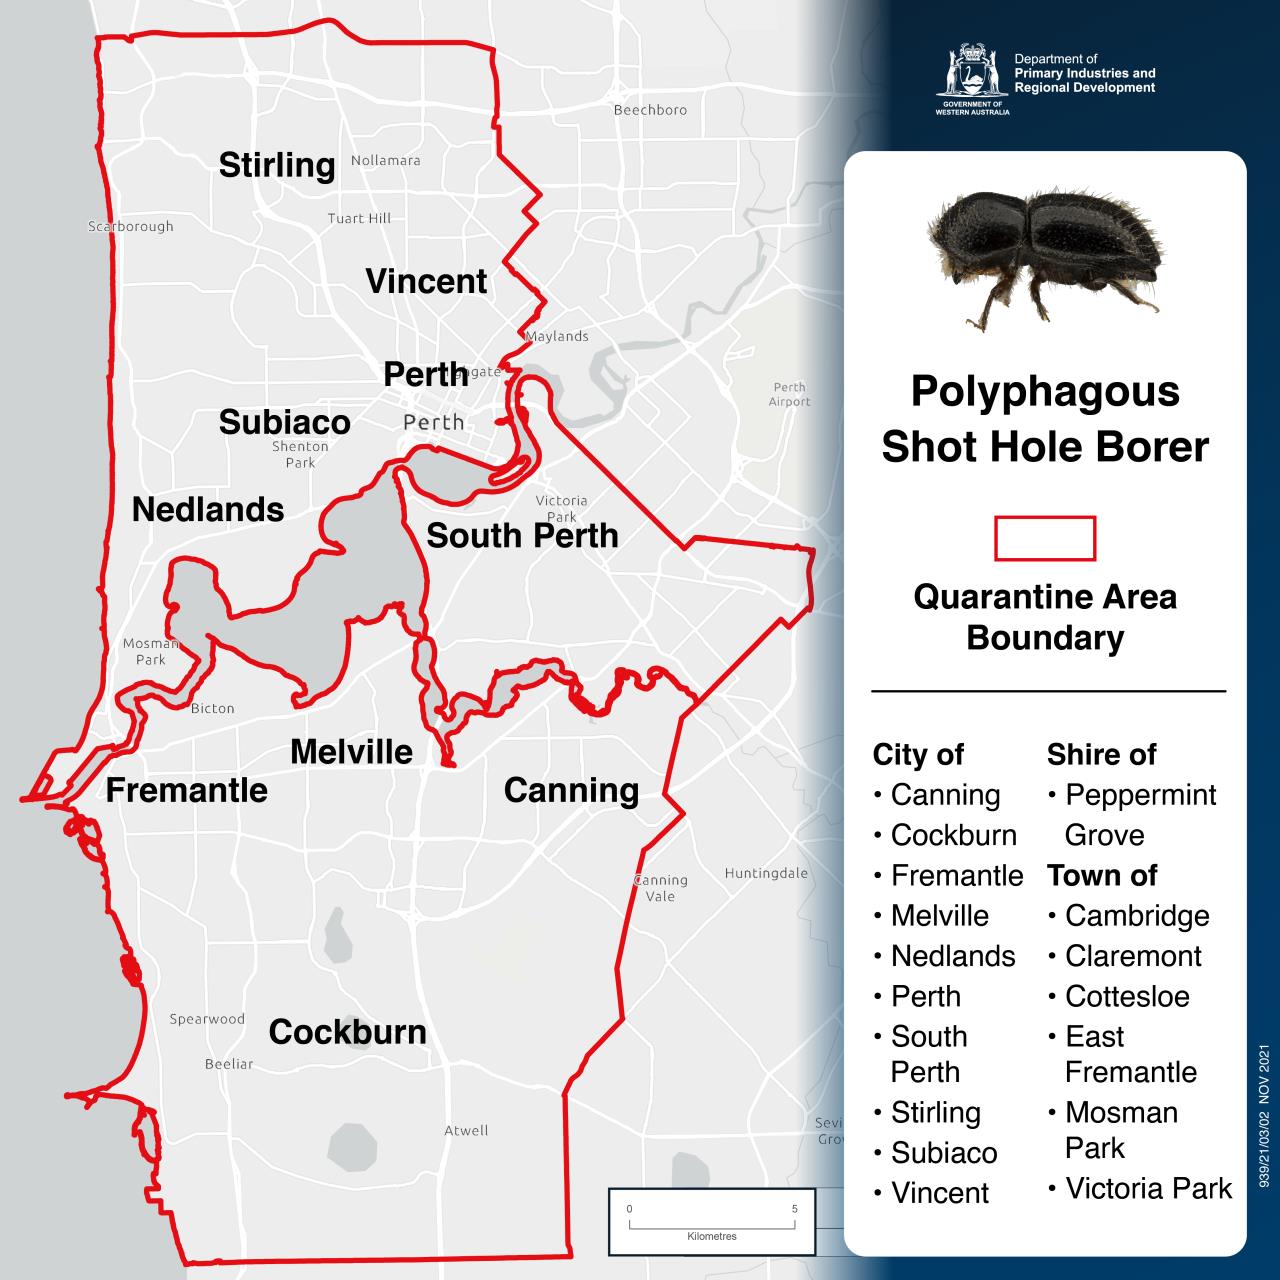 Quarantine Area for borer expanded to support surveillance